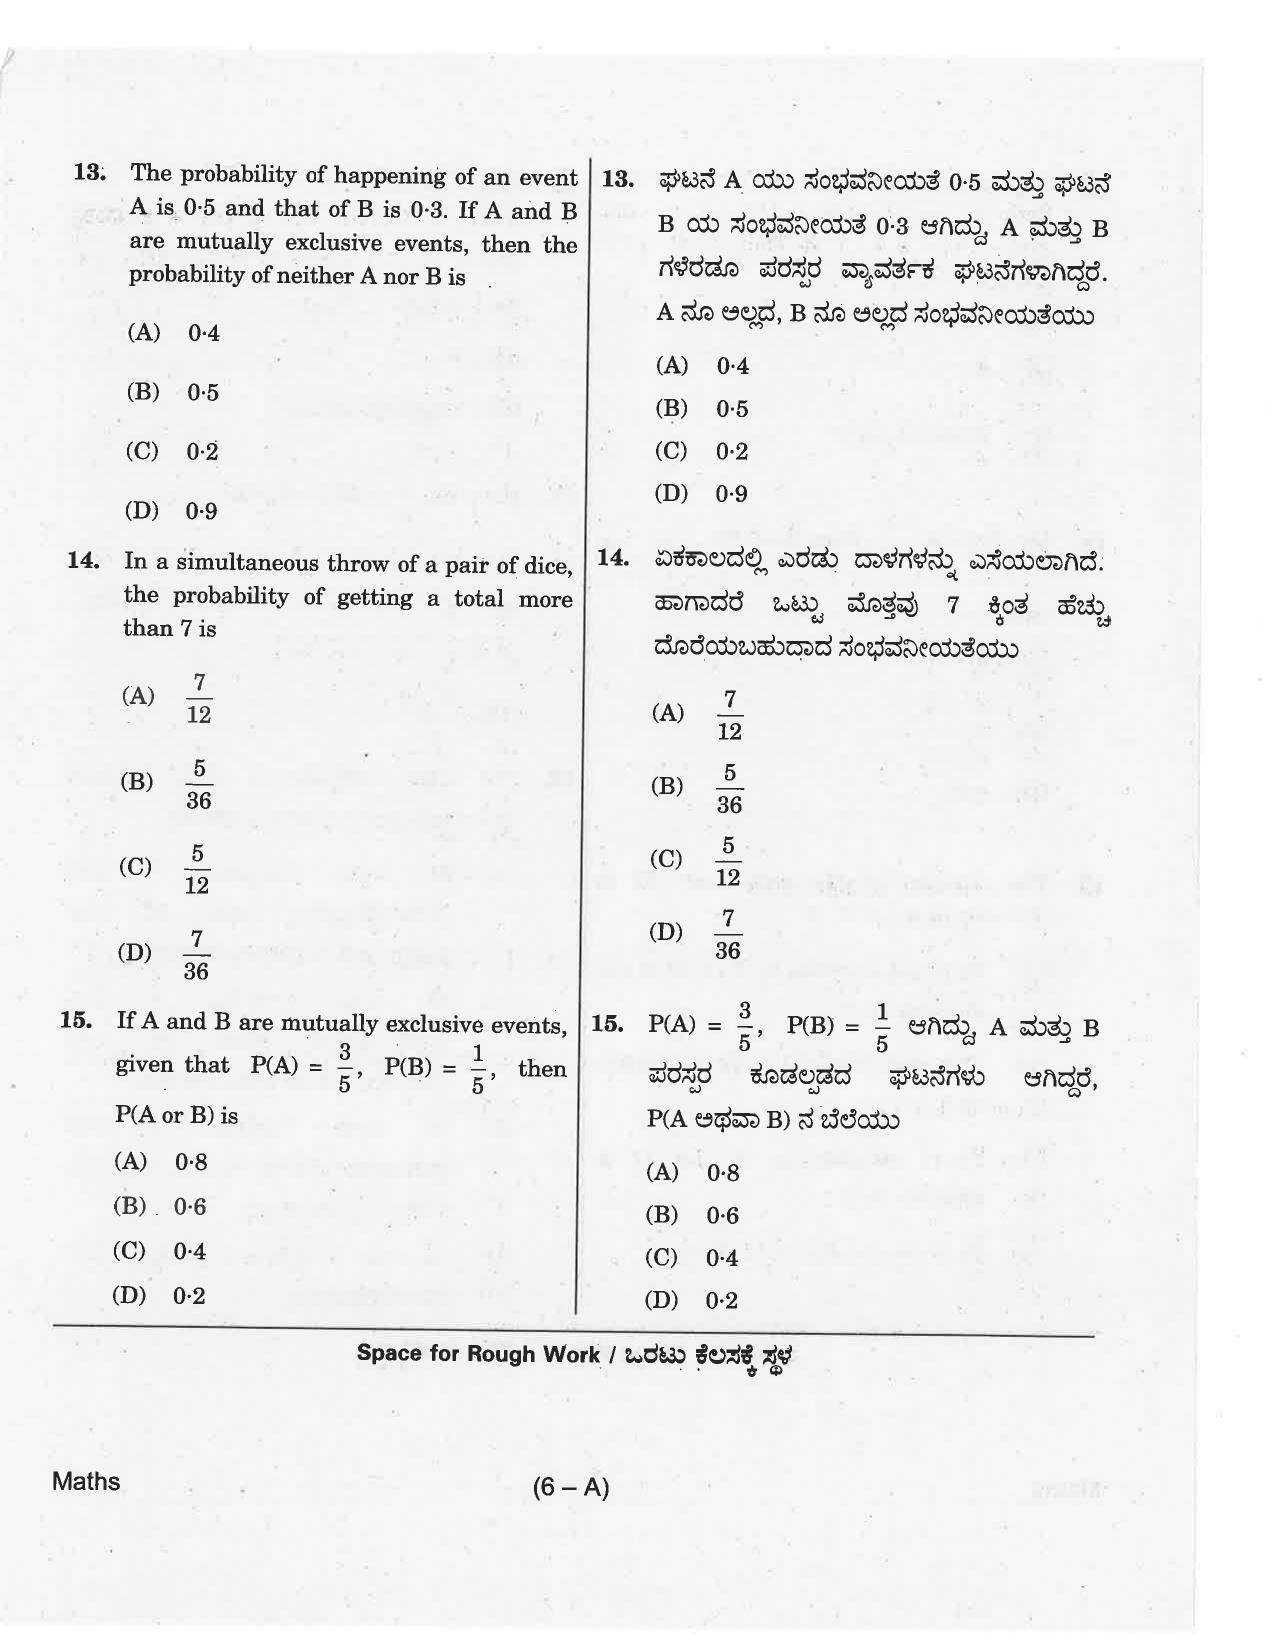 KCET Mathematics 2018 Question Papers - Page 6